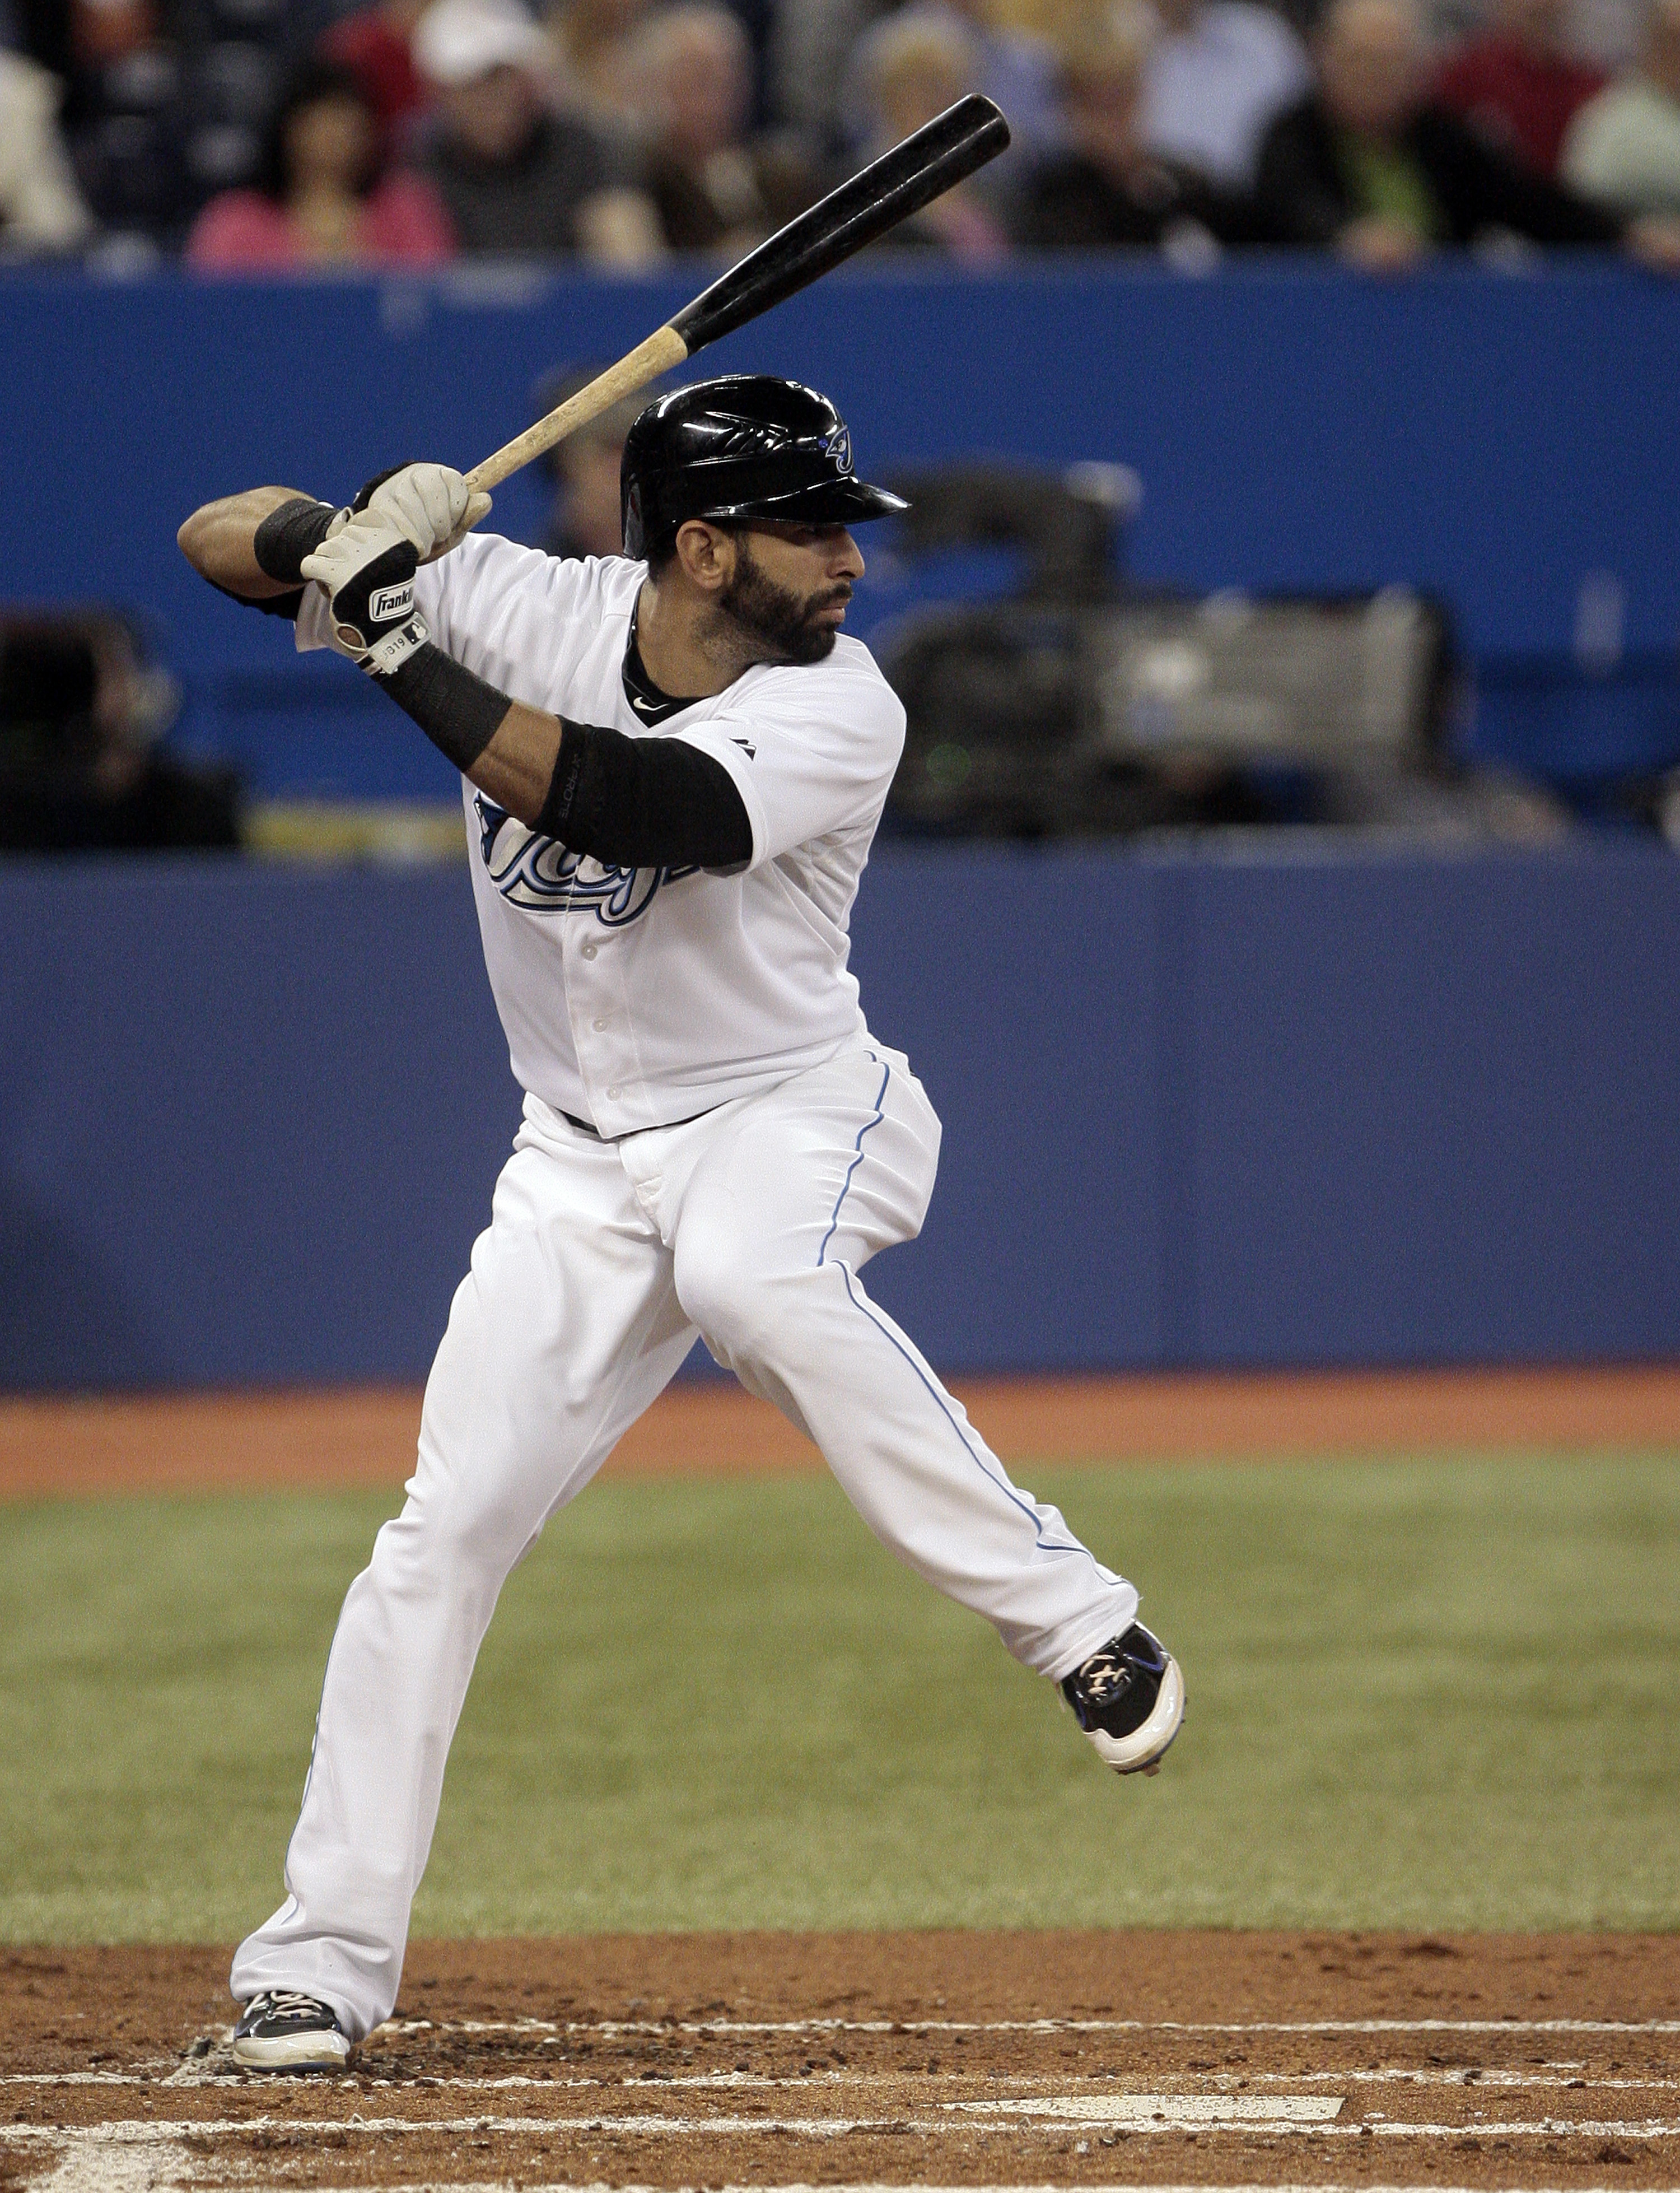 TORONTO, CANADA - MAY 18: Jose Bautista #19 of the Toronto Blue Jays hits against the Tampa Bay Rays during MLB action at the Rogers Centre May 18, 2011 in Toronto, Ontario, Canada. (Photo by Abelimages/Getty Images)